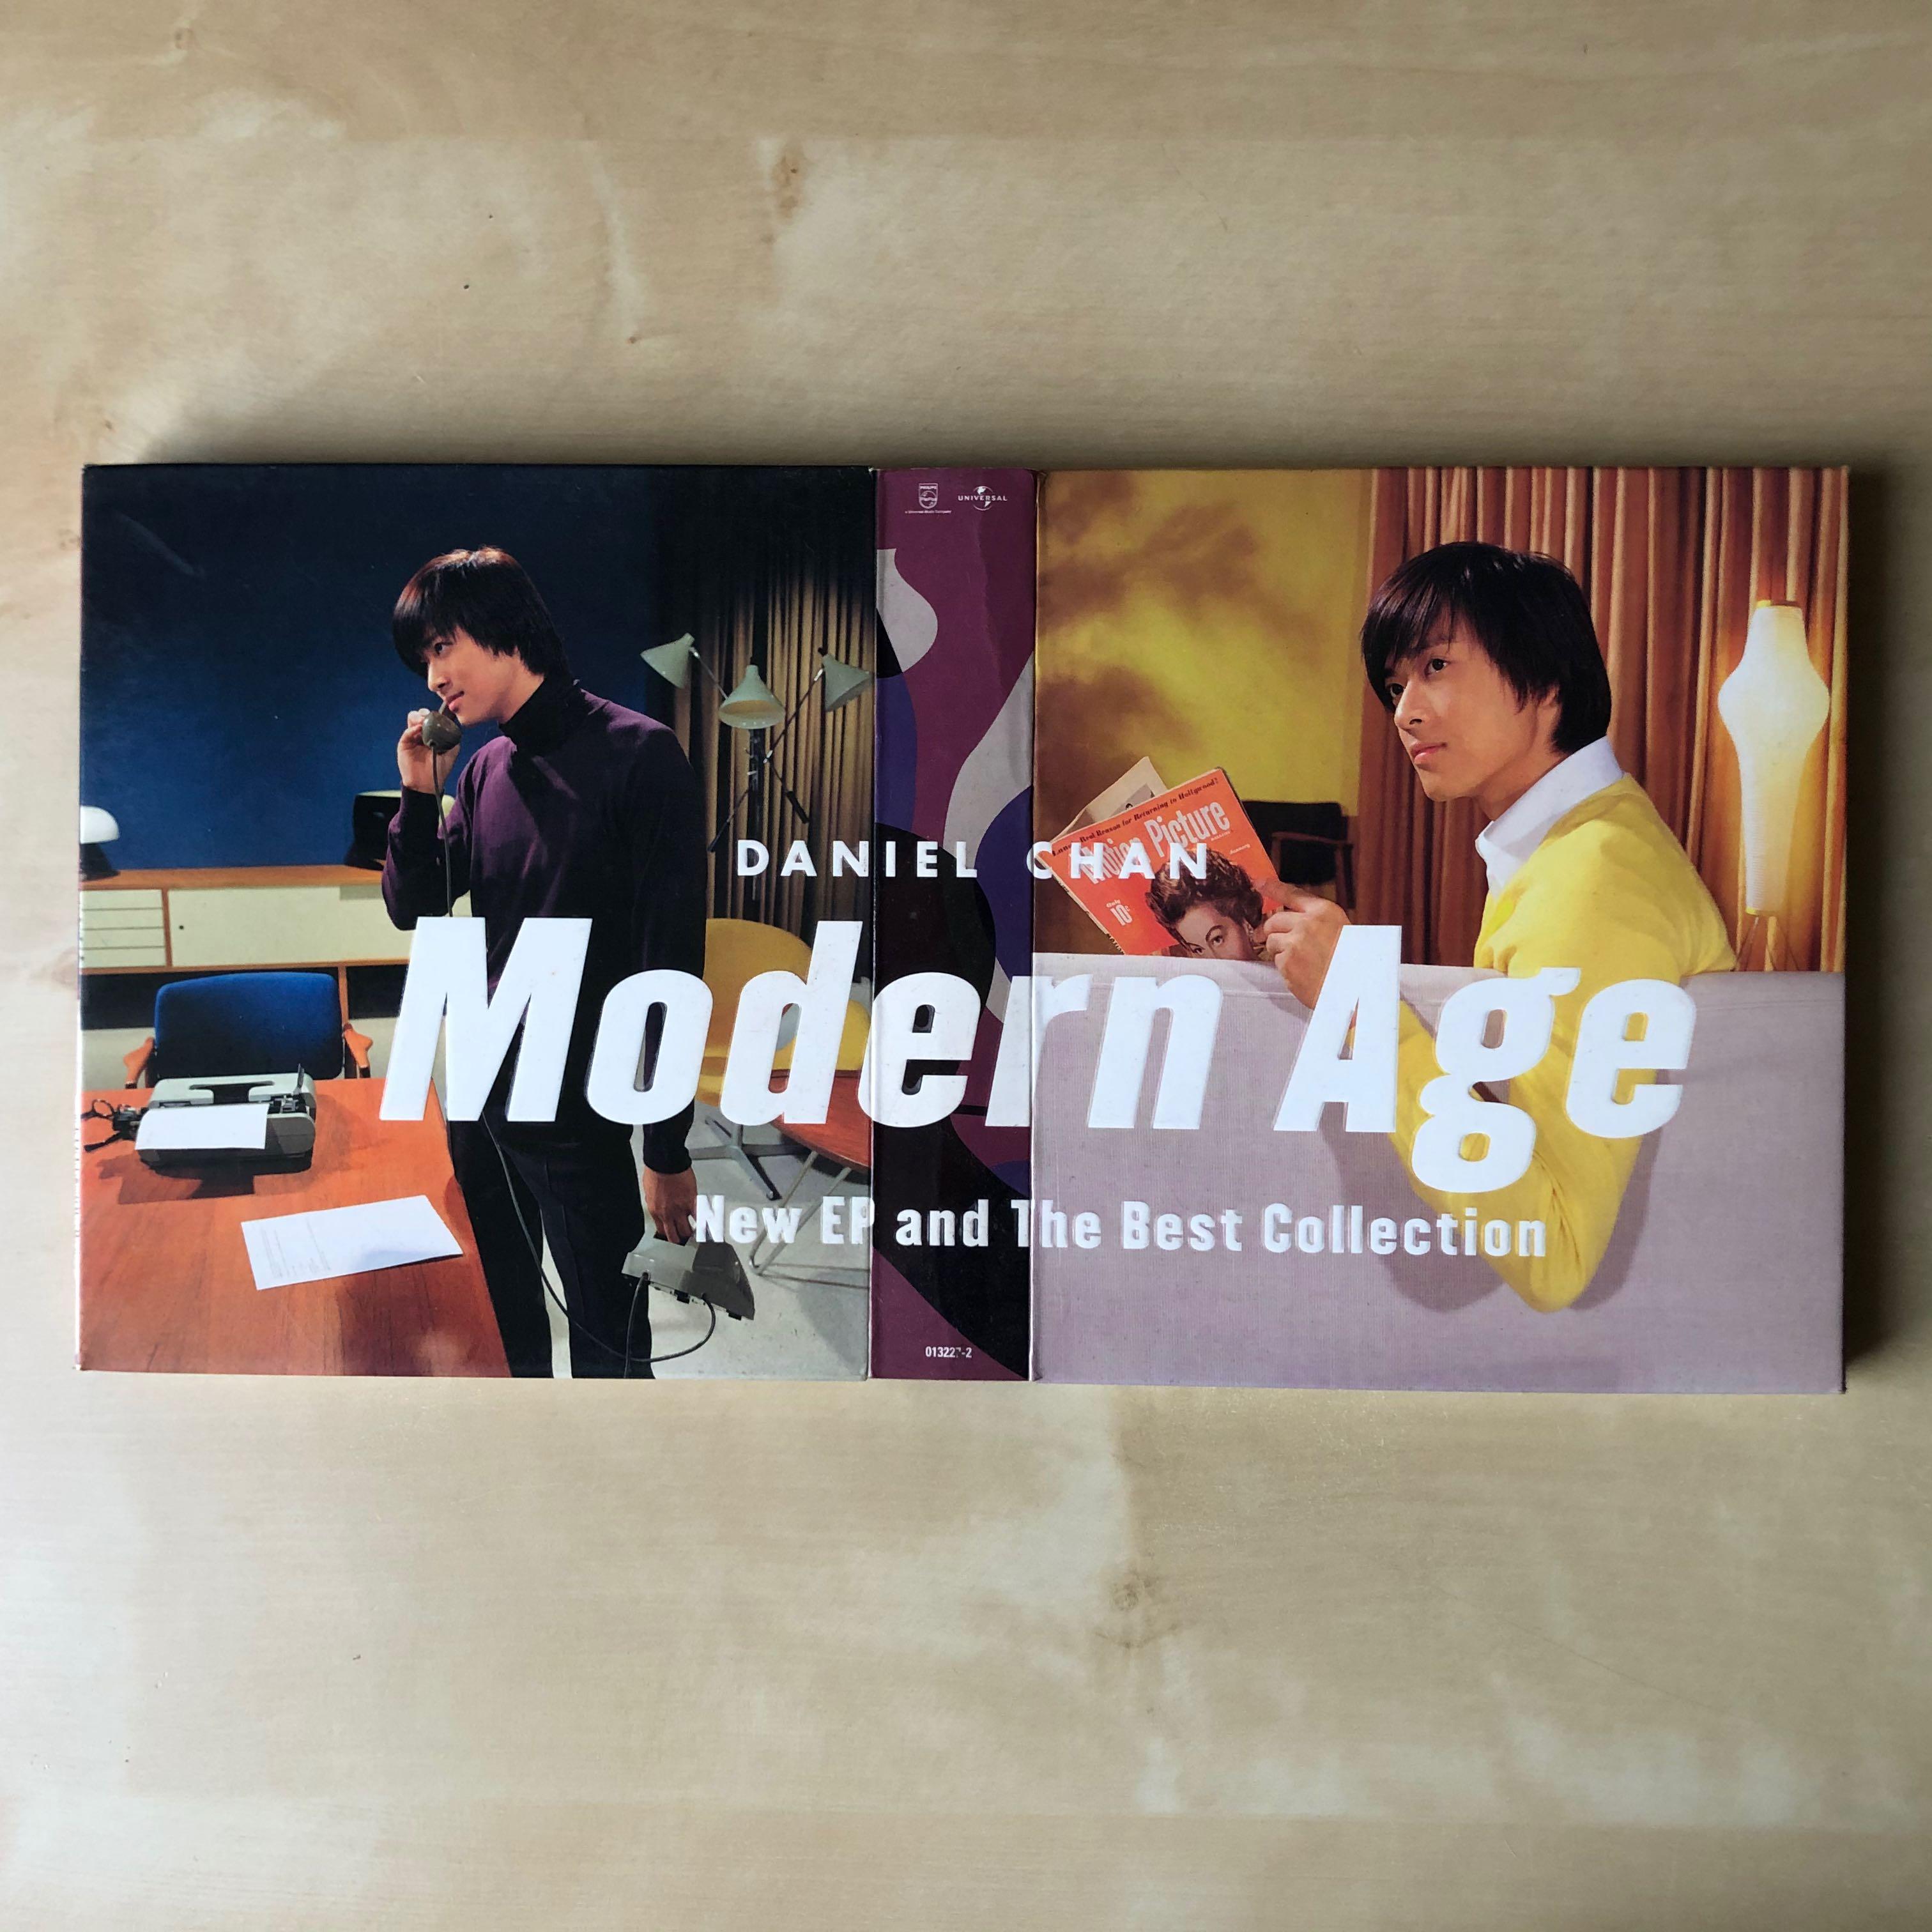 CD丨陳曉東Daniel Chan Modern Age New EP and The Best Collection 新曲+精選(2CD)